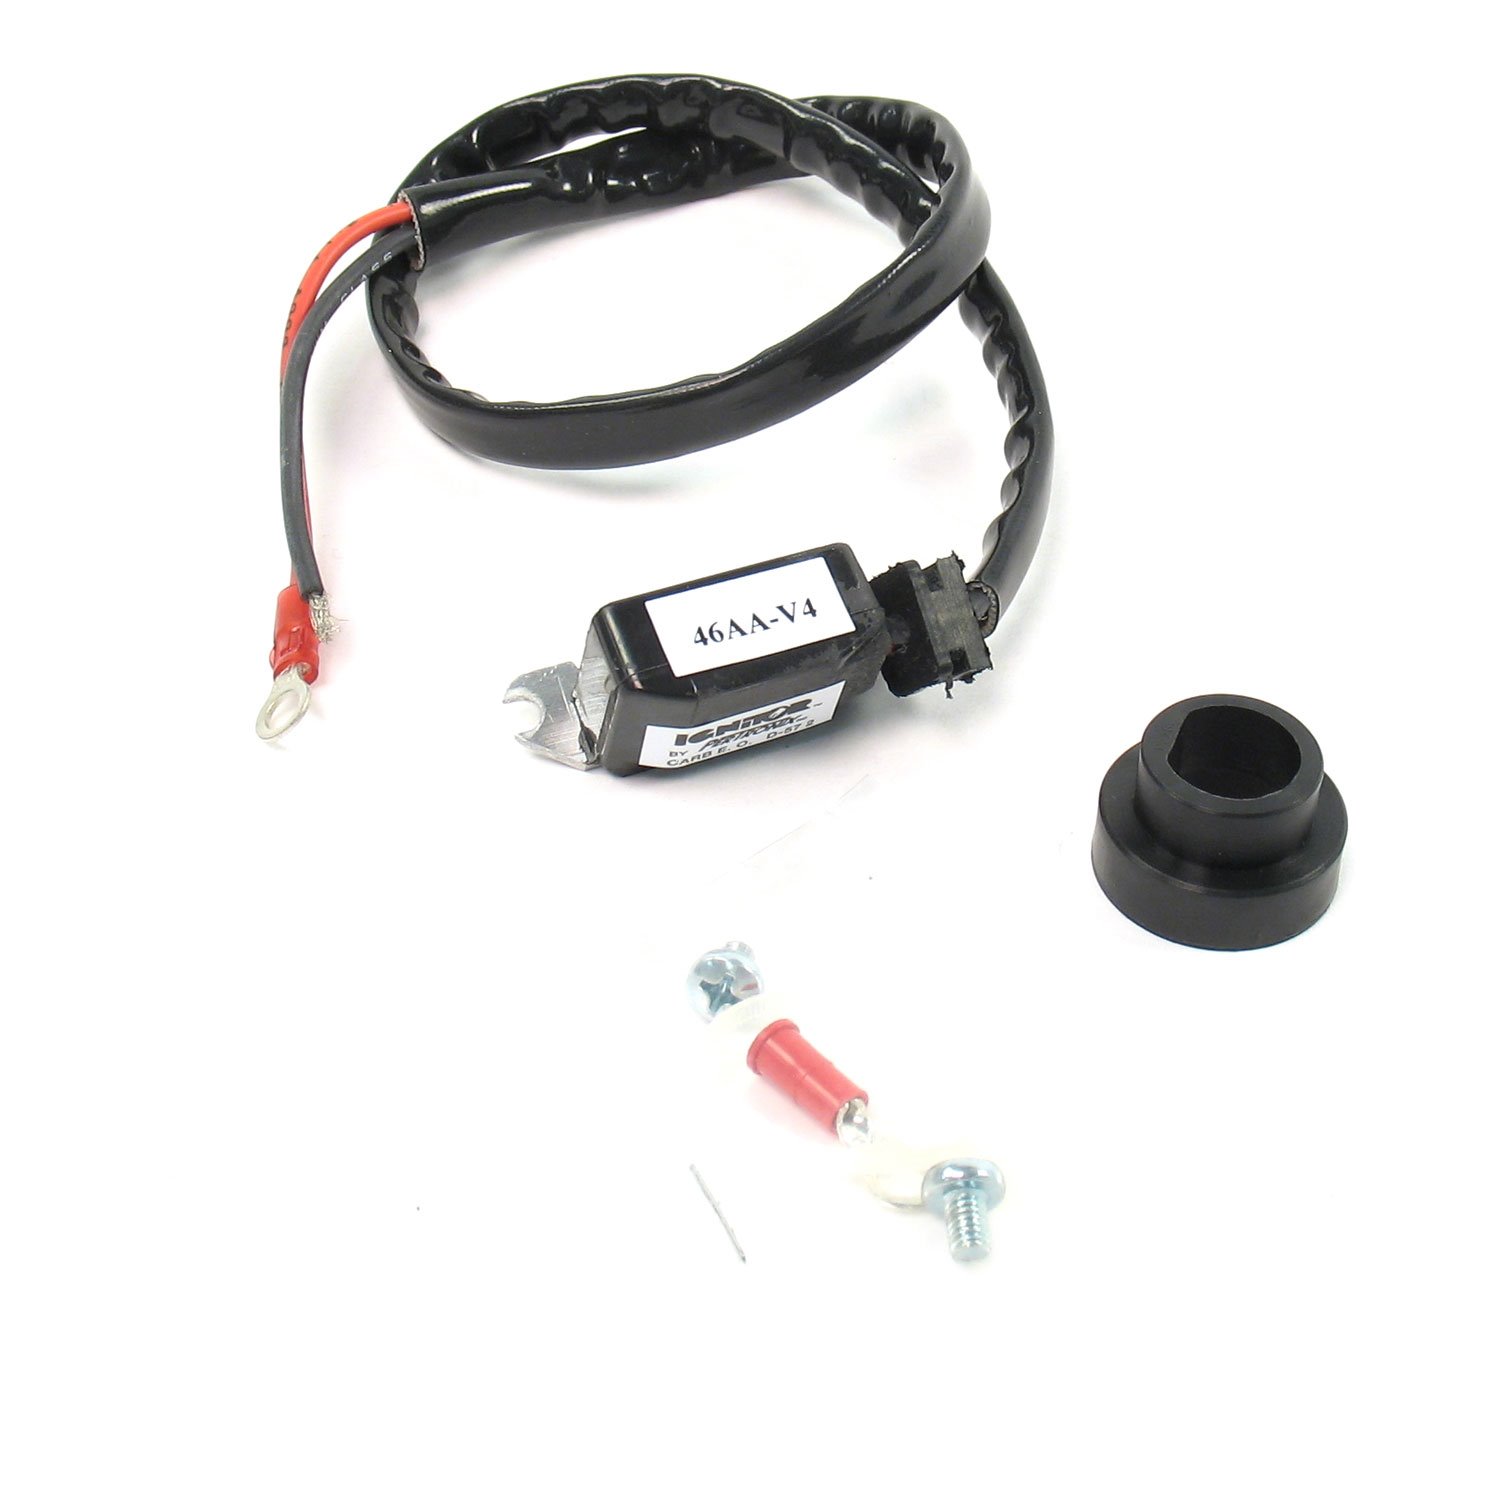 Ignition Ignitor Mitsubishi elect Carb Approved D-57-22